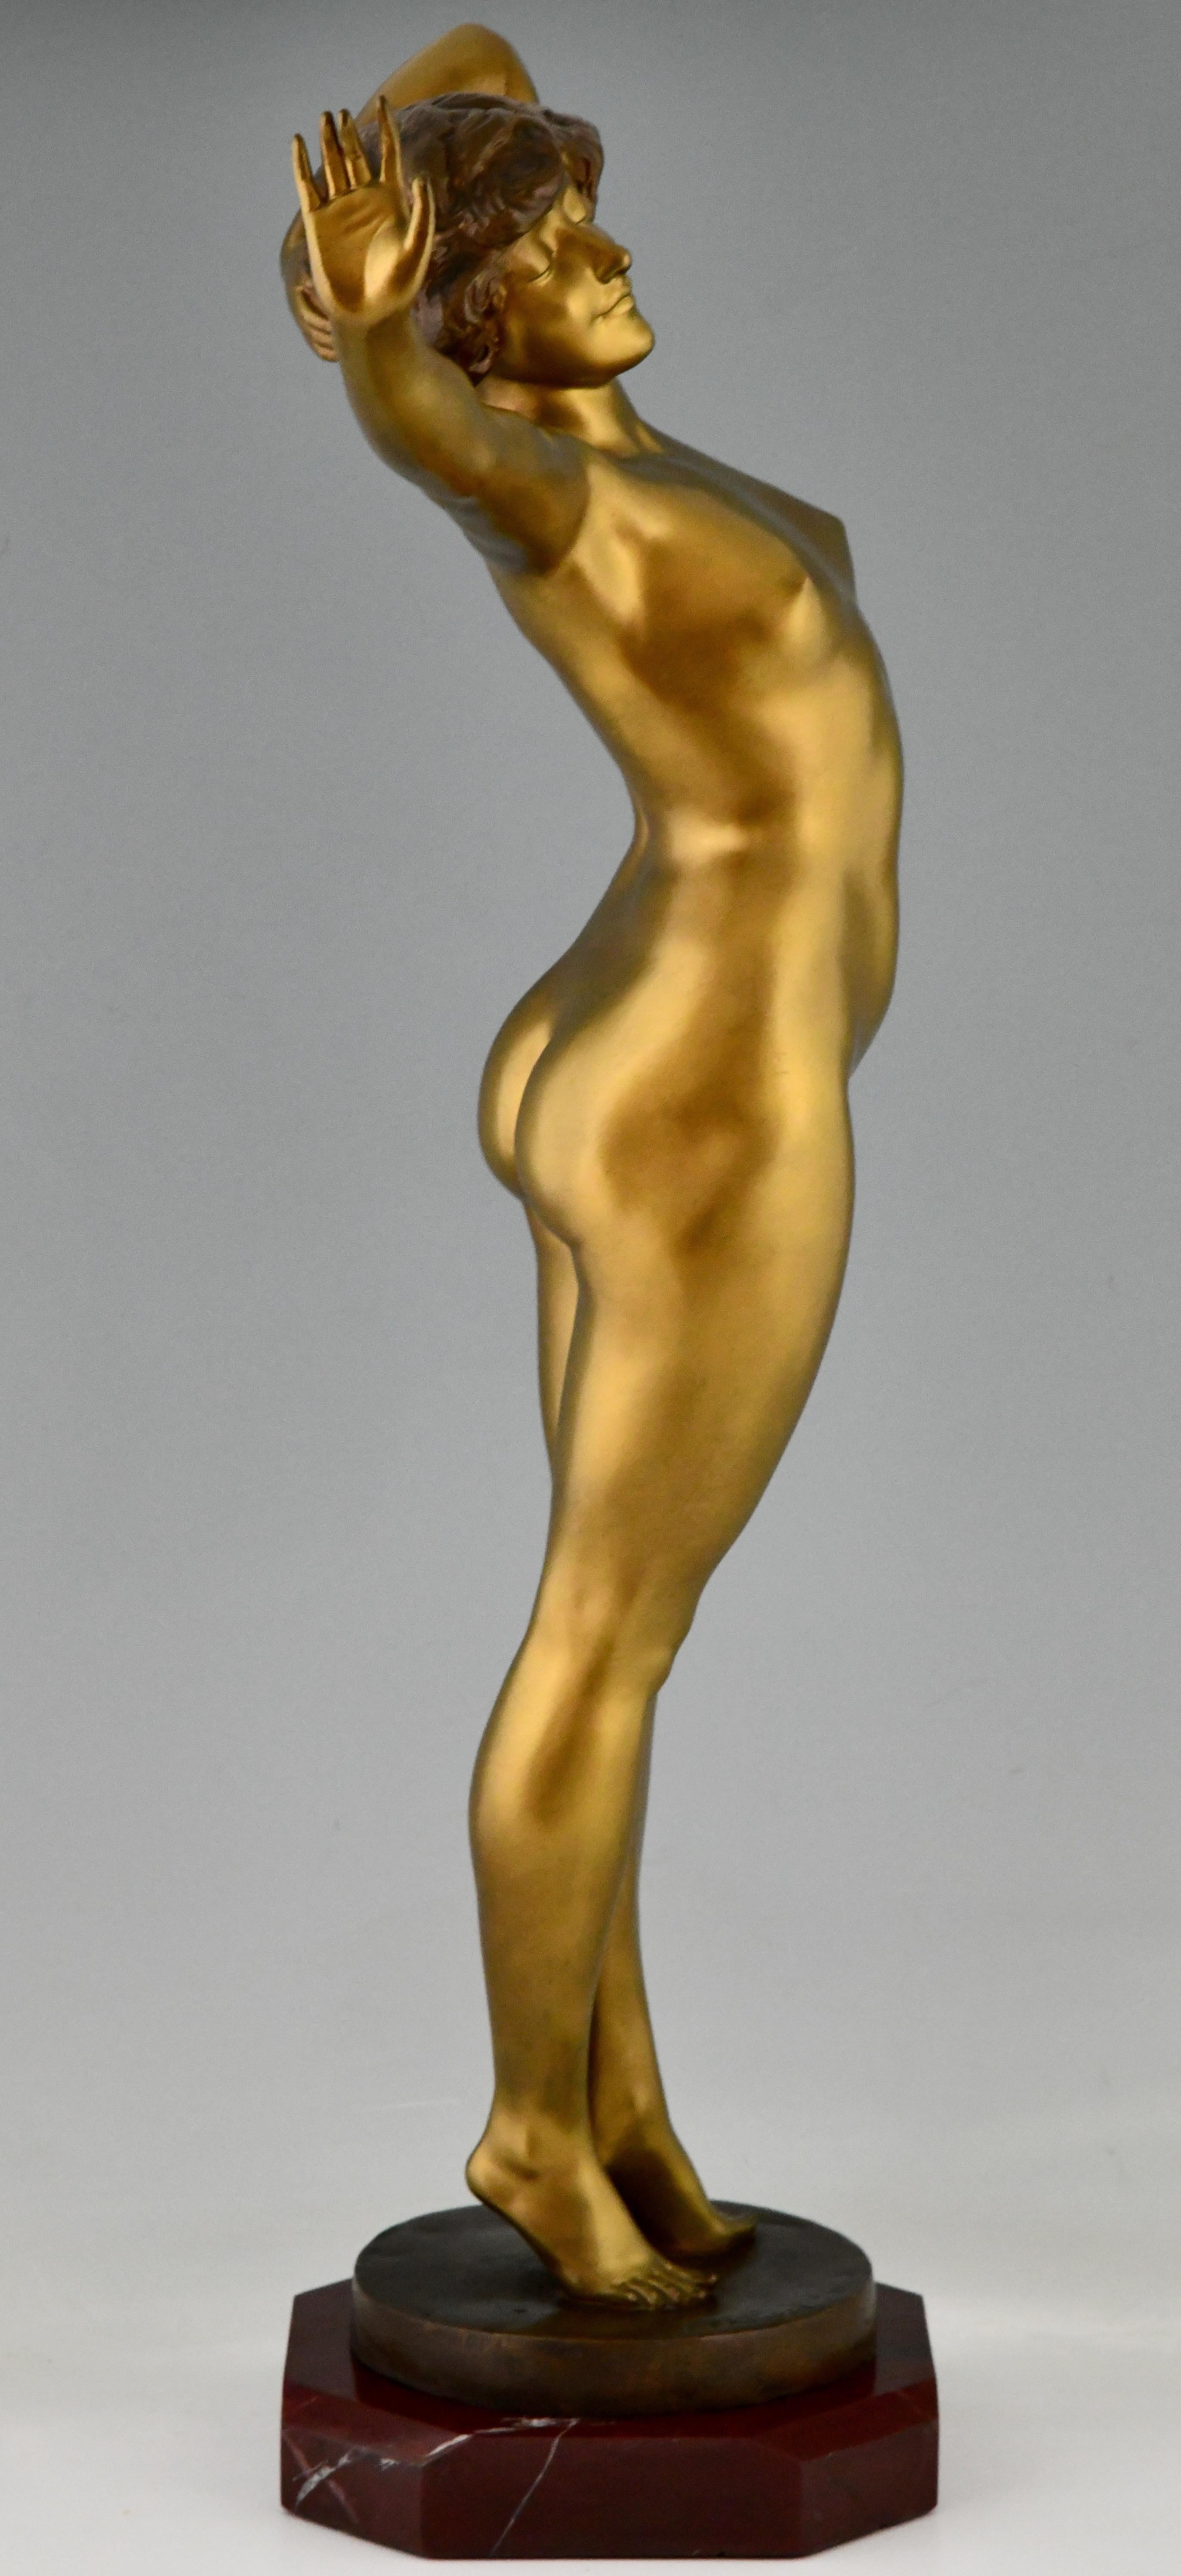 Patinated Awakening Art Deco Bronze Sculpture Nude by Paul Philippe, France, 1920